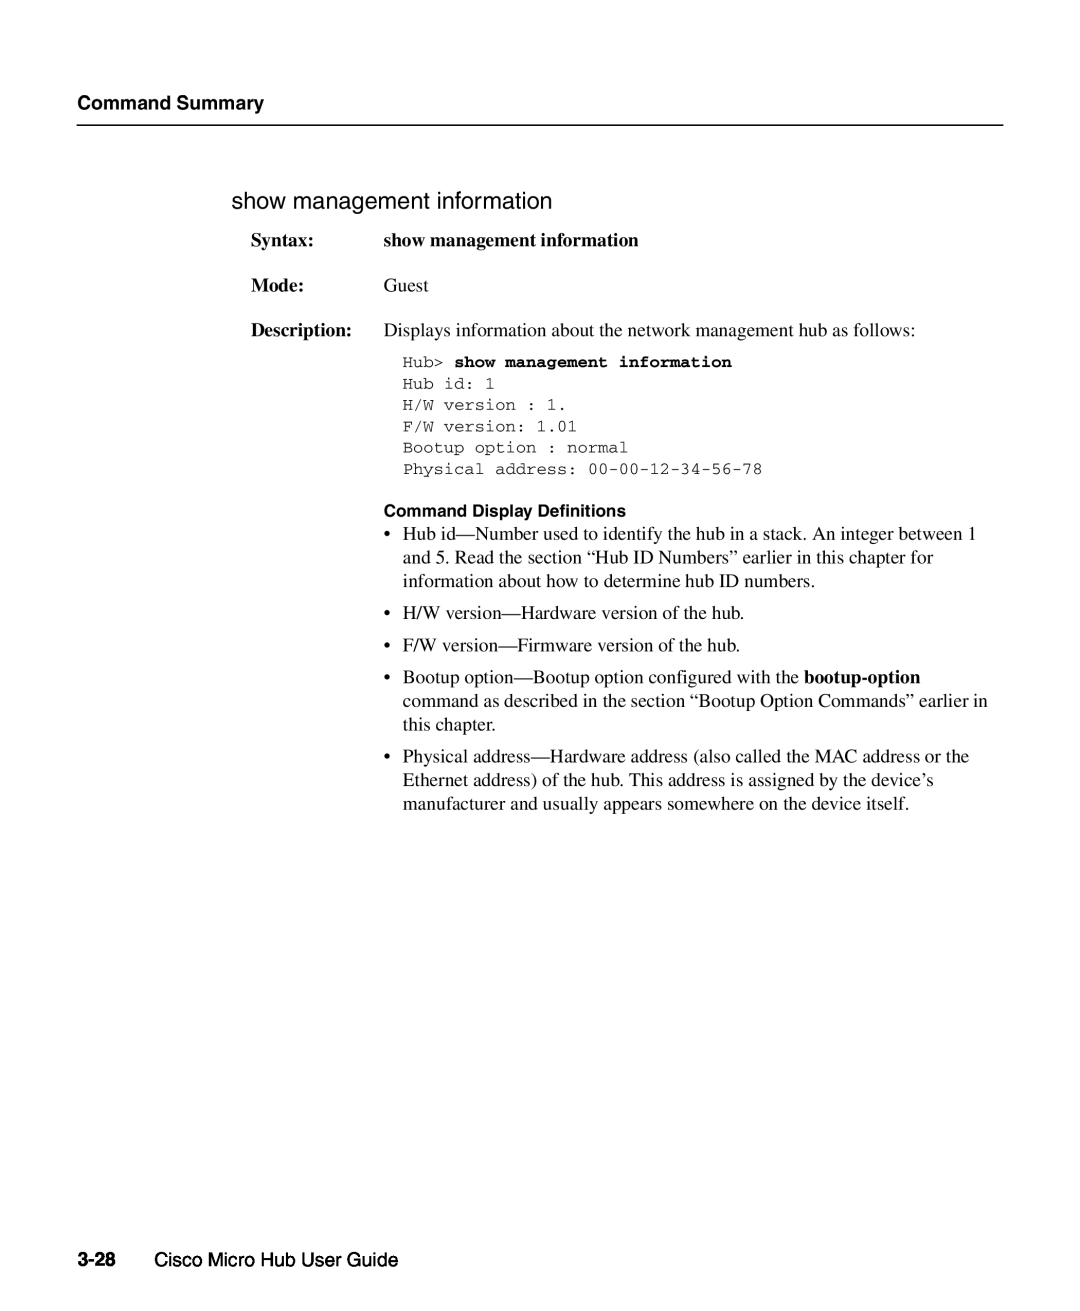 Cisco Systems 1503 manual show management information, Command Summary, Cisco Micro Hub User Guide 